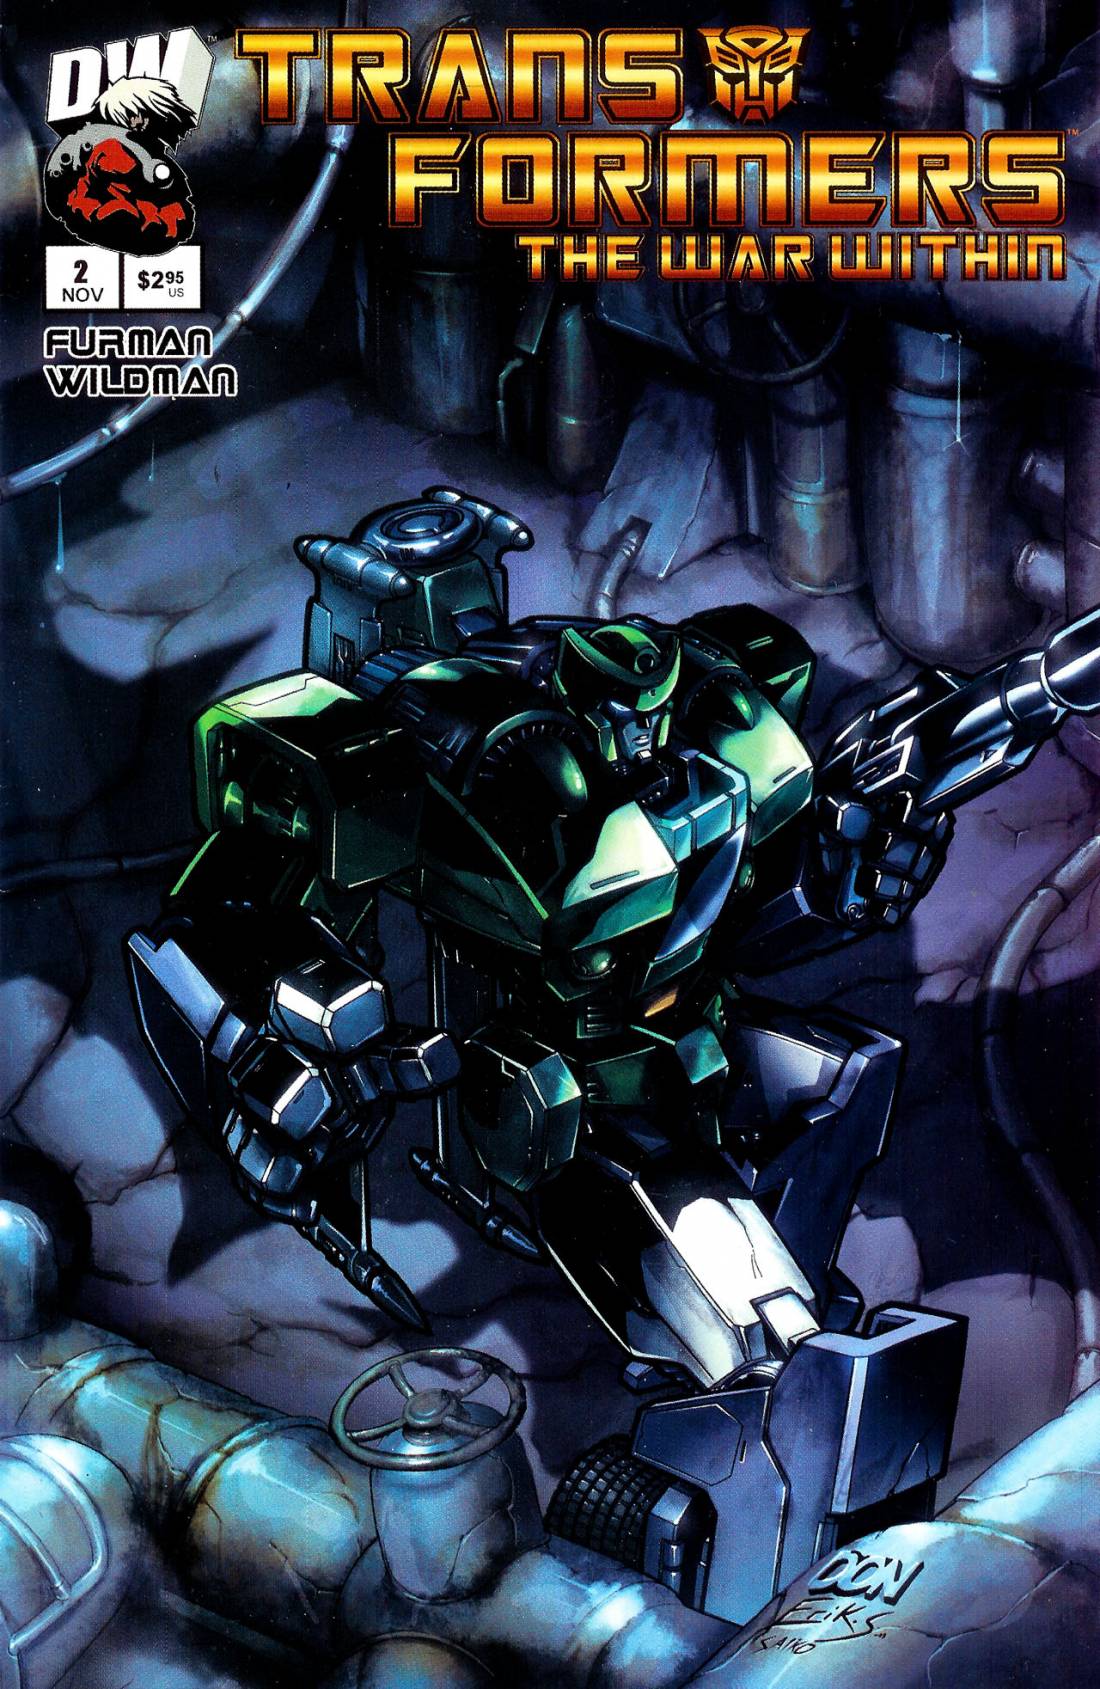 Transformers THE WAR WITHIN: The Dark Ages #2